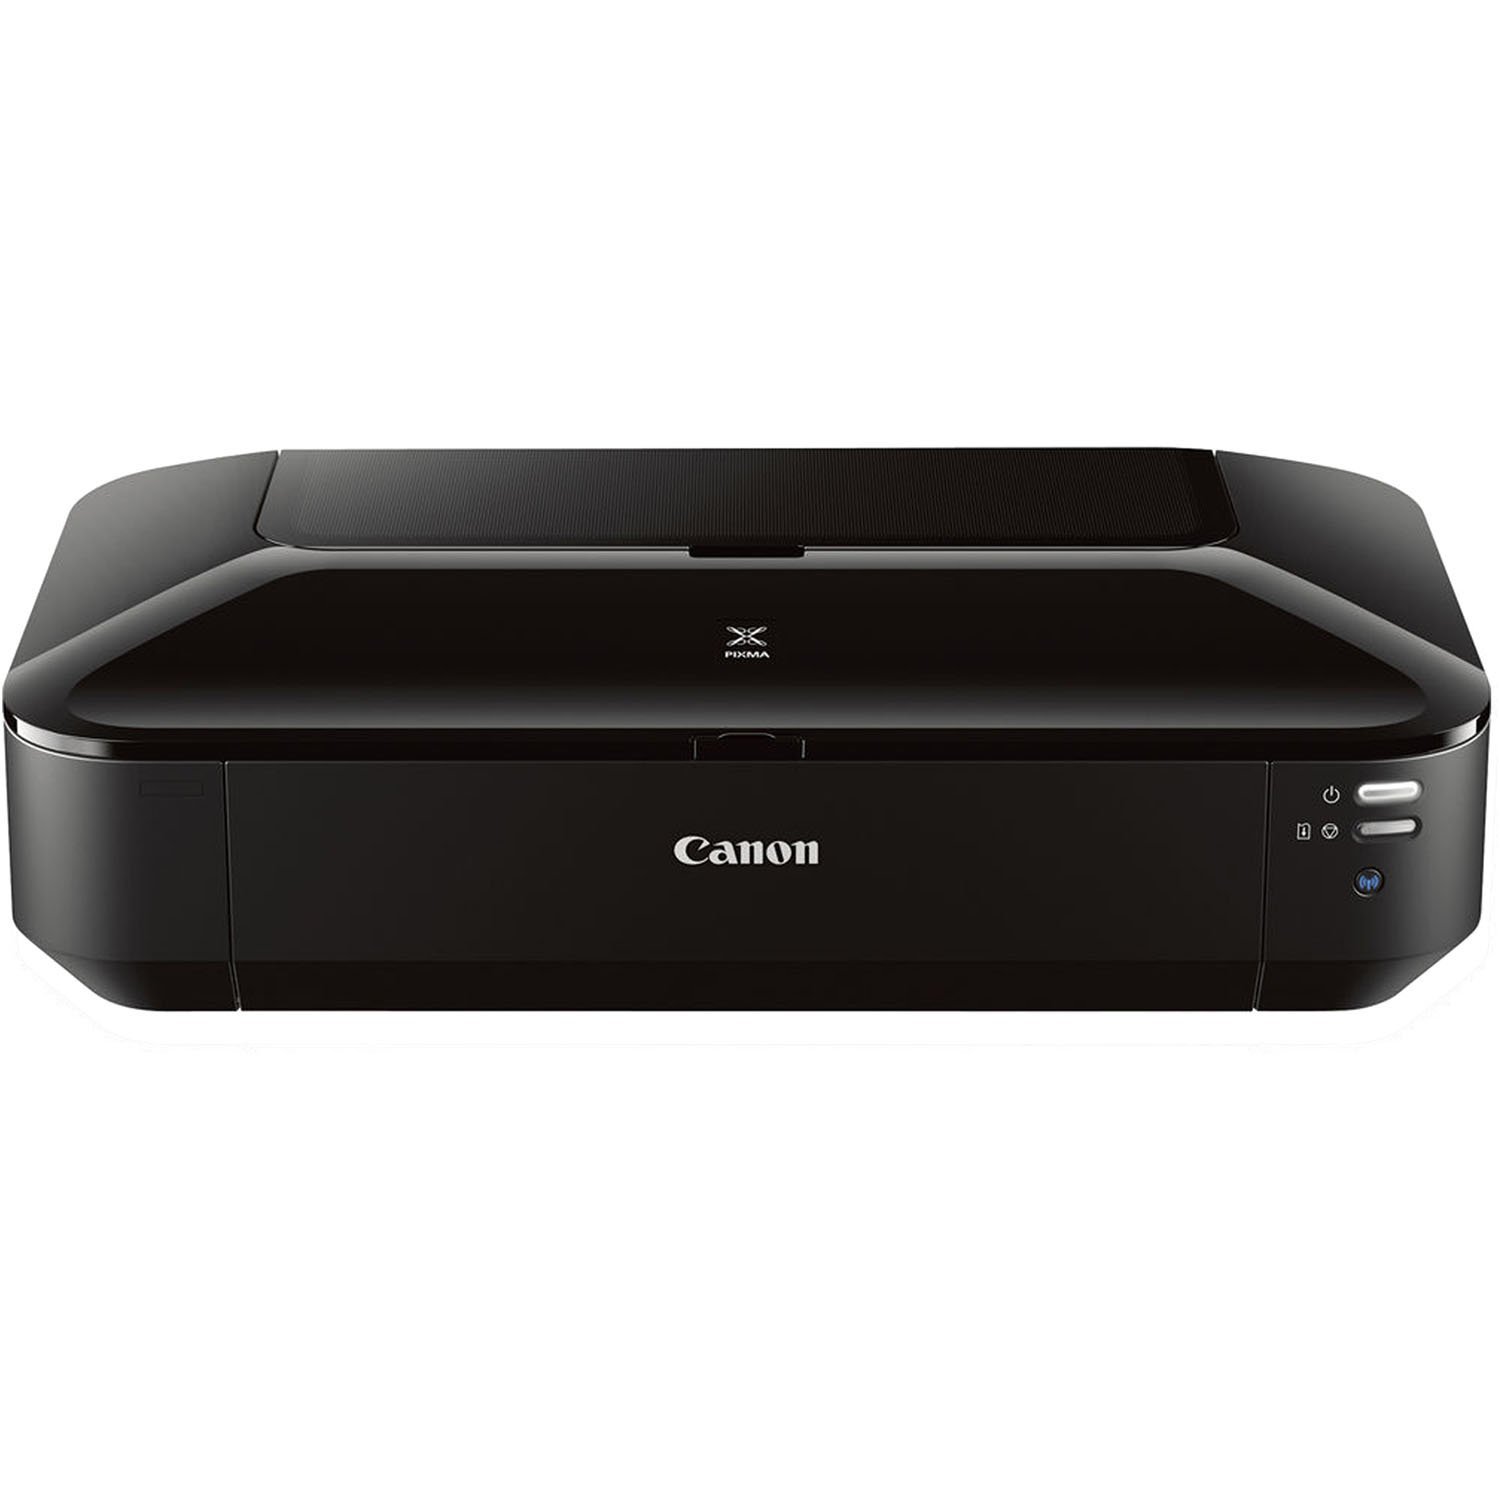 where can i safely download canon pixma mp160 driver for mac?